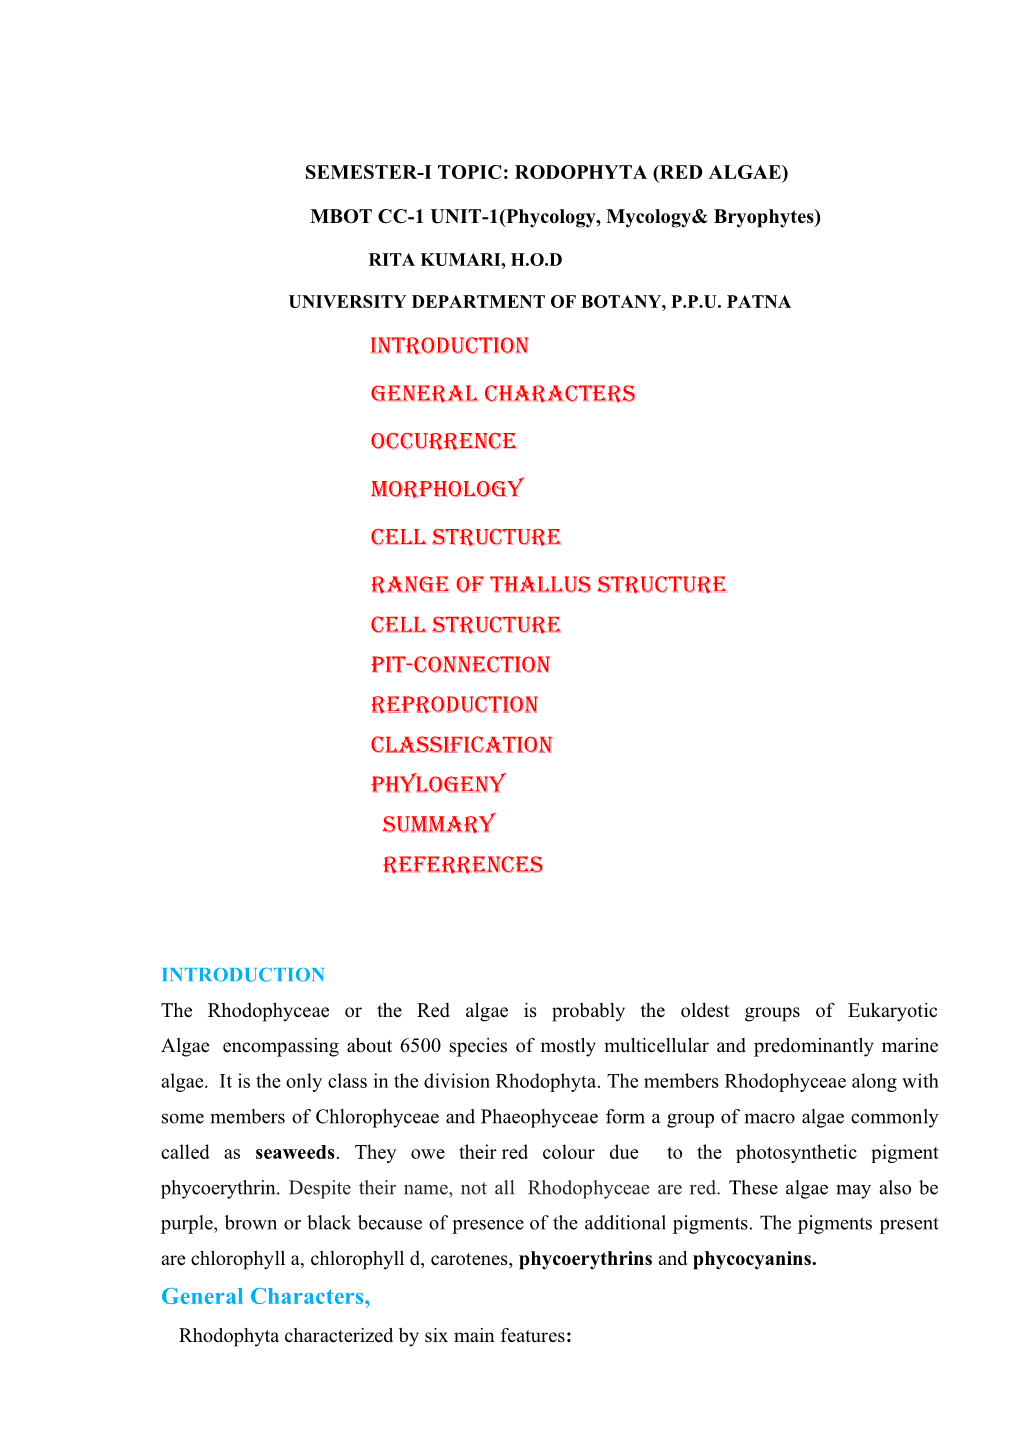 Introduction General Characters Occurrence Morphology Cell